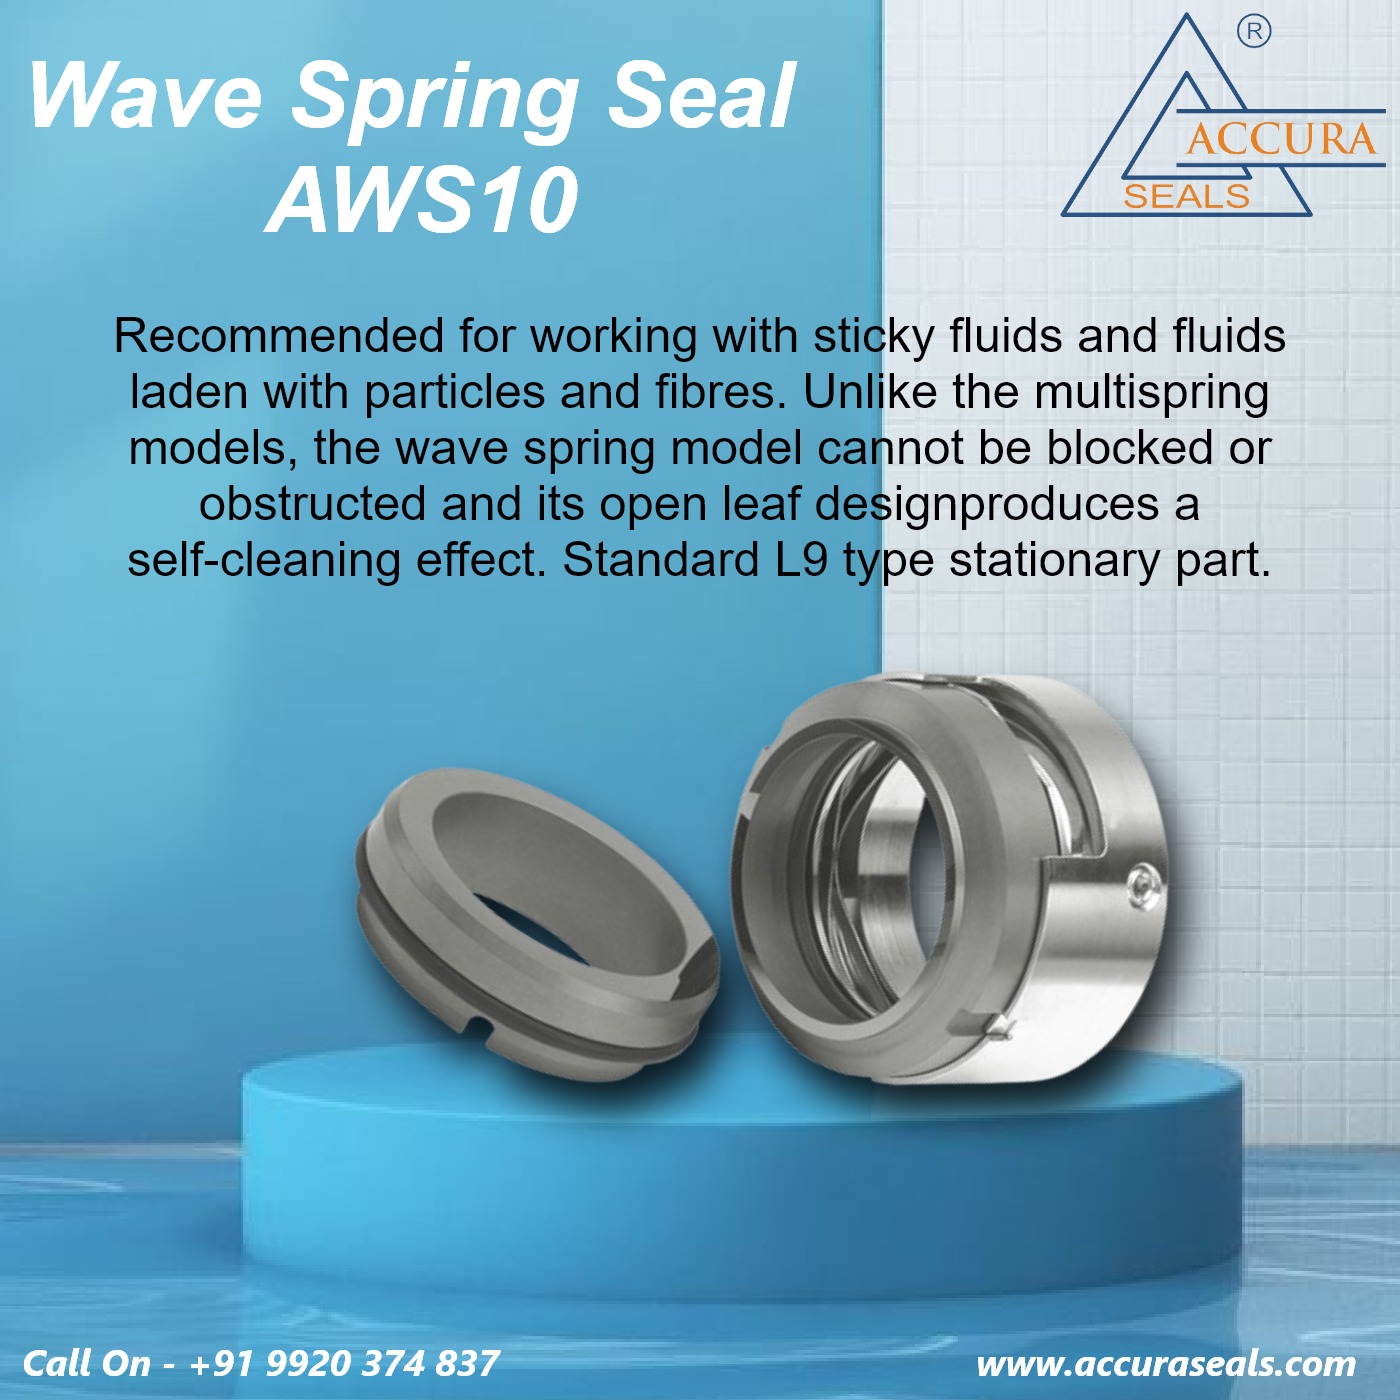 Wave Spring Seal AWS10 for Sticky Fluids